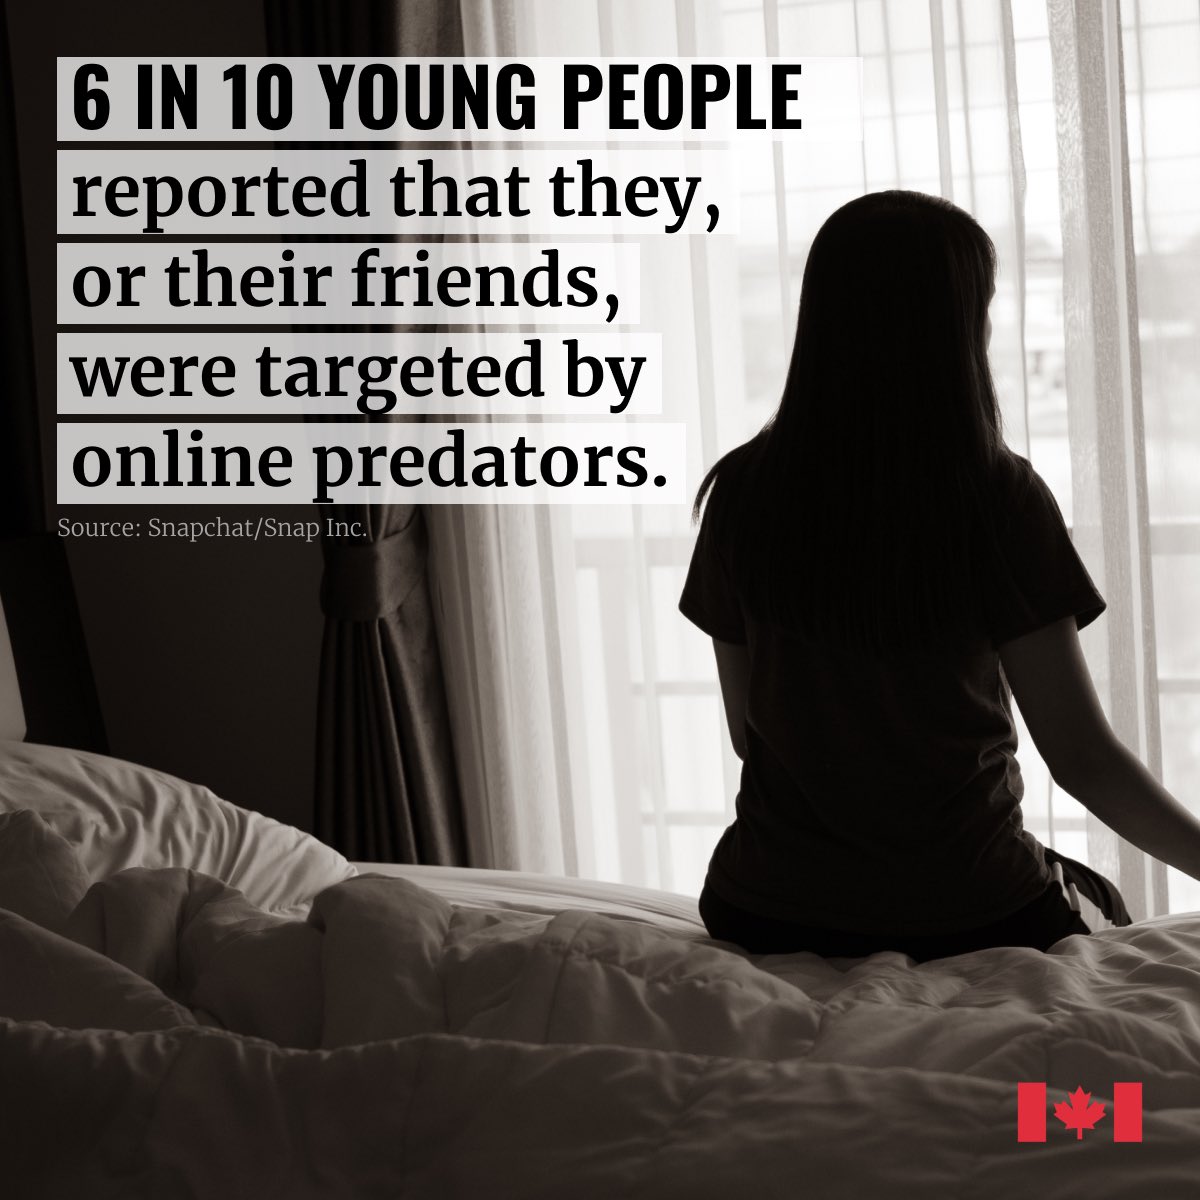 Our government is taking action to #ProtectKidsOnline. Learn more: canada.ca/en/canadian-he…